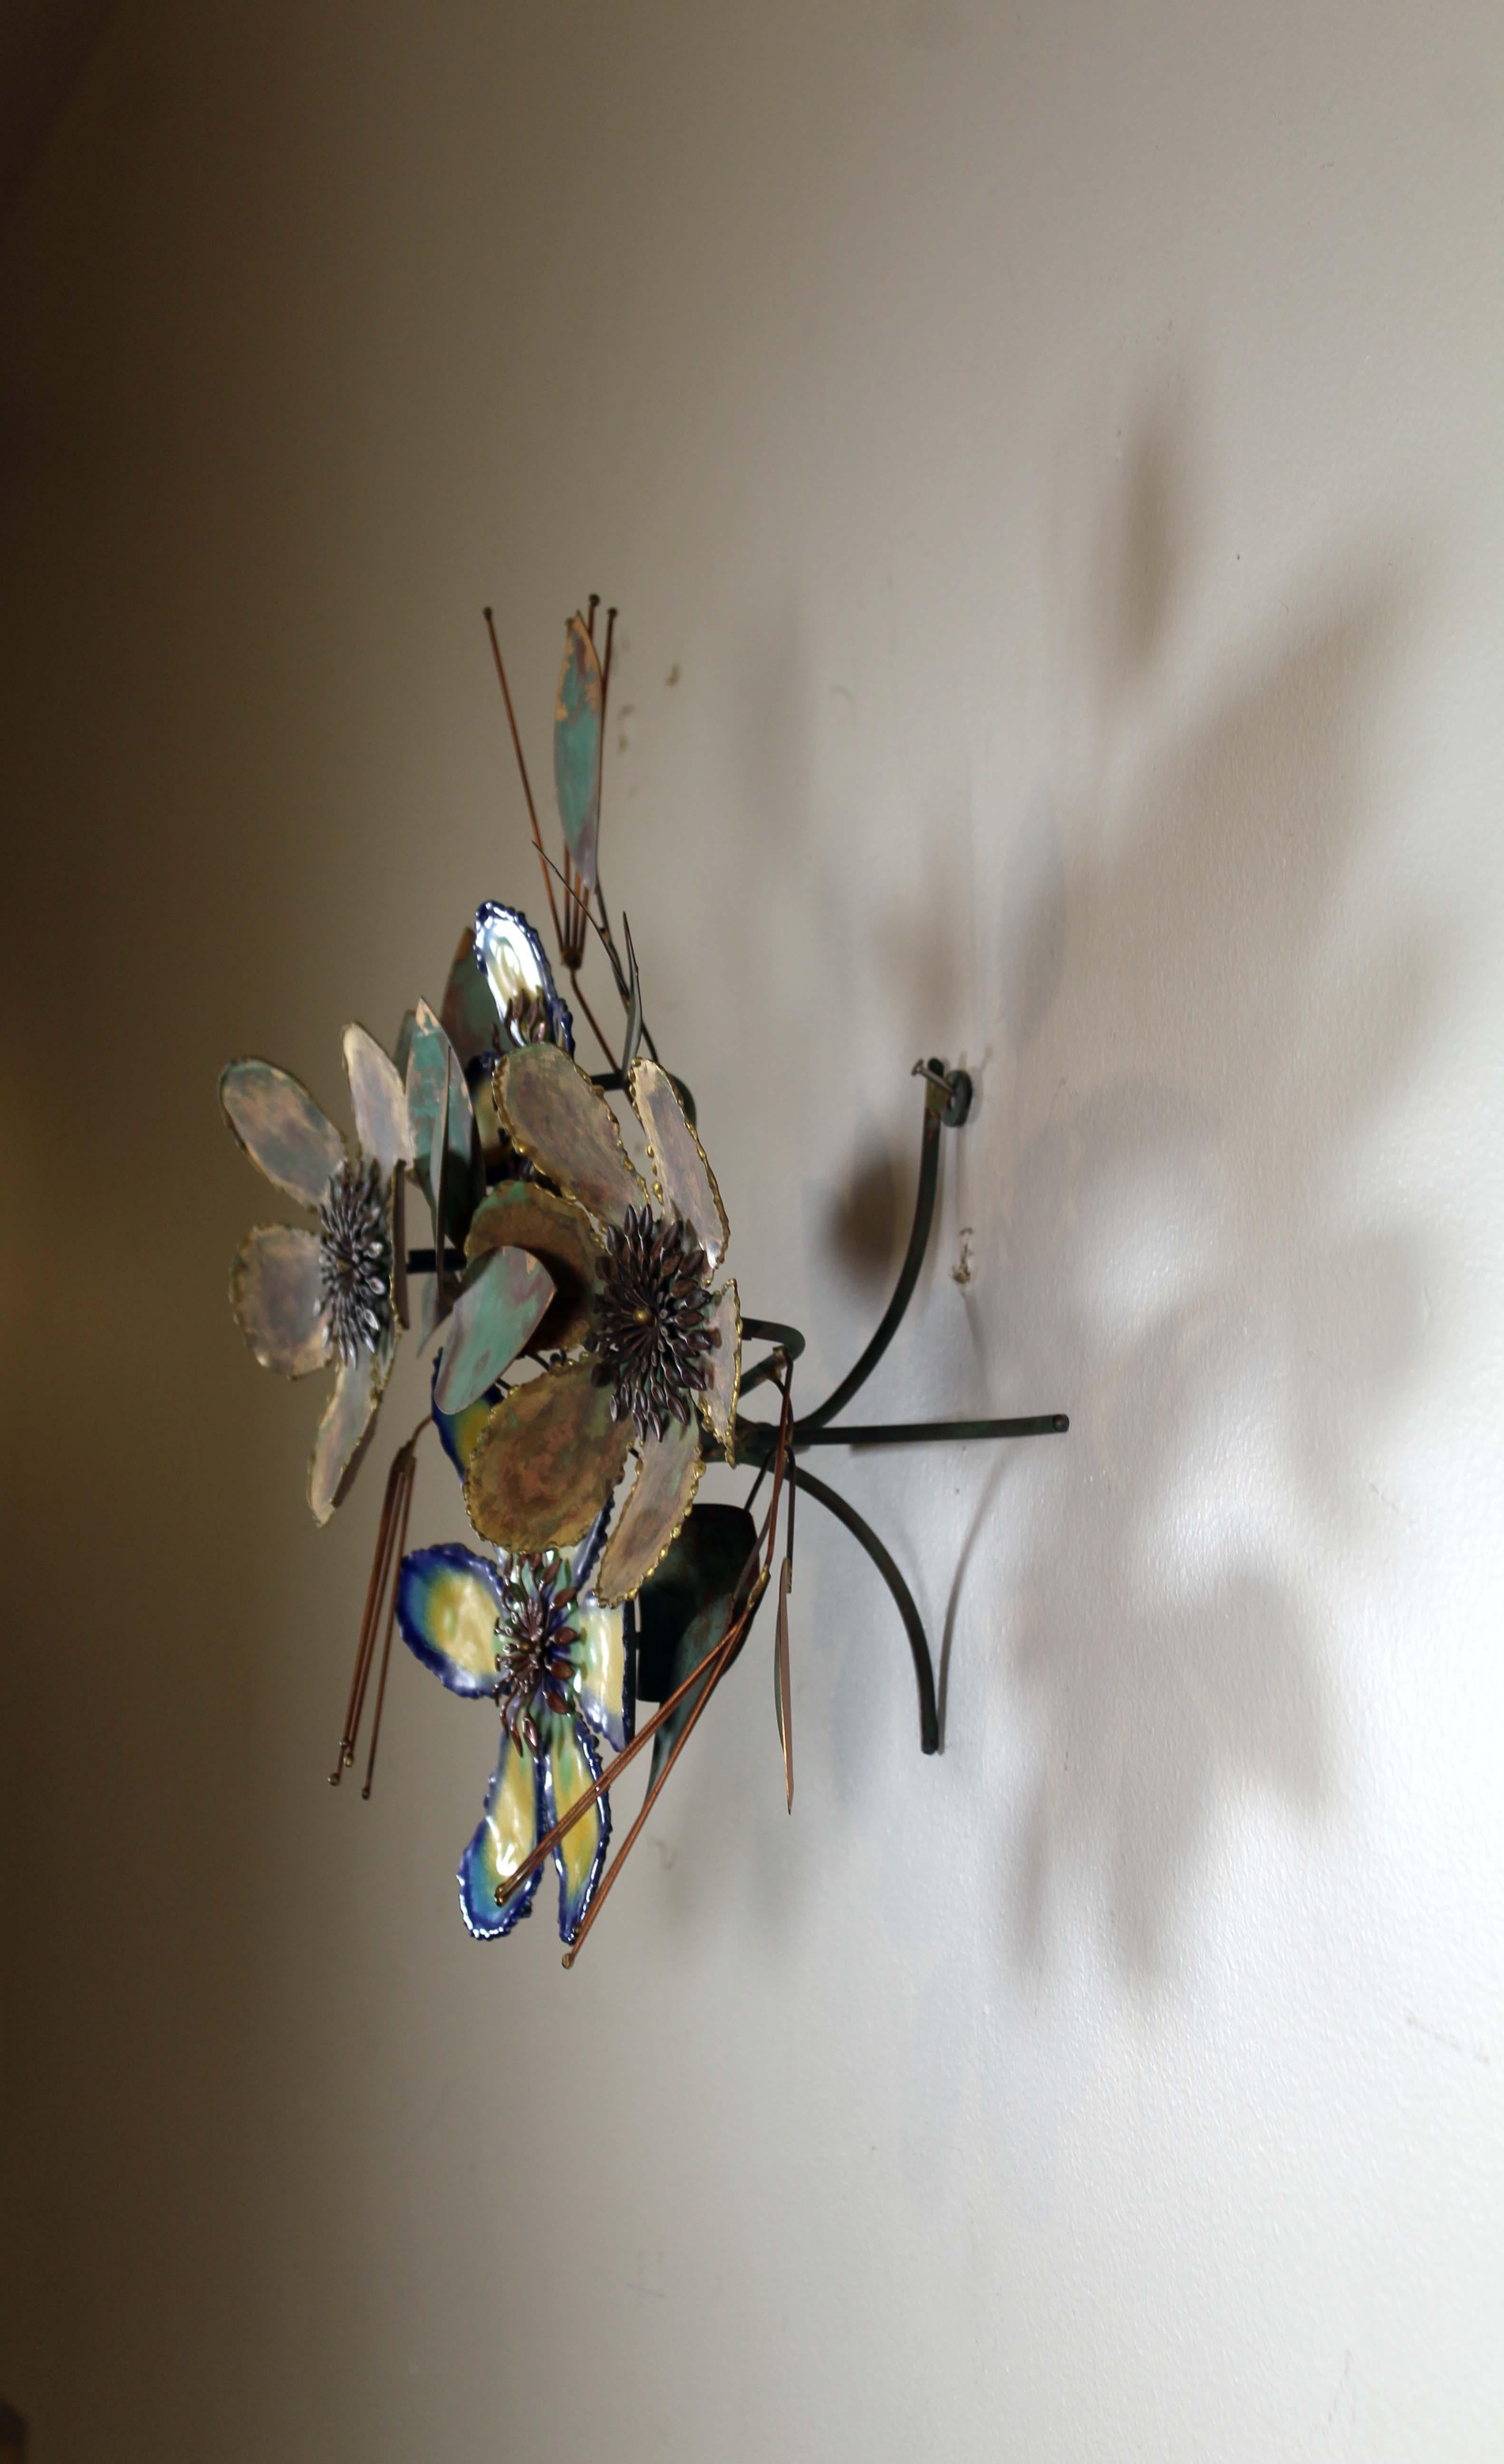 An iconic design of the Mid-Century Modern era, a metal wall sculpture by Curtis Jere. Signed on the leaf with a 1969 date. The sculpture elevates off the the wall and has a floral design that pops with yellow and shades of turquoise hues. There is